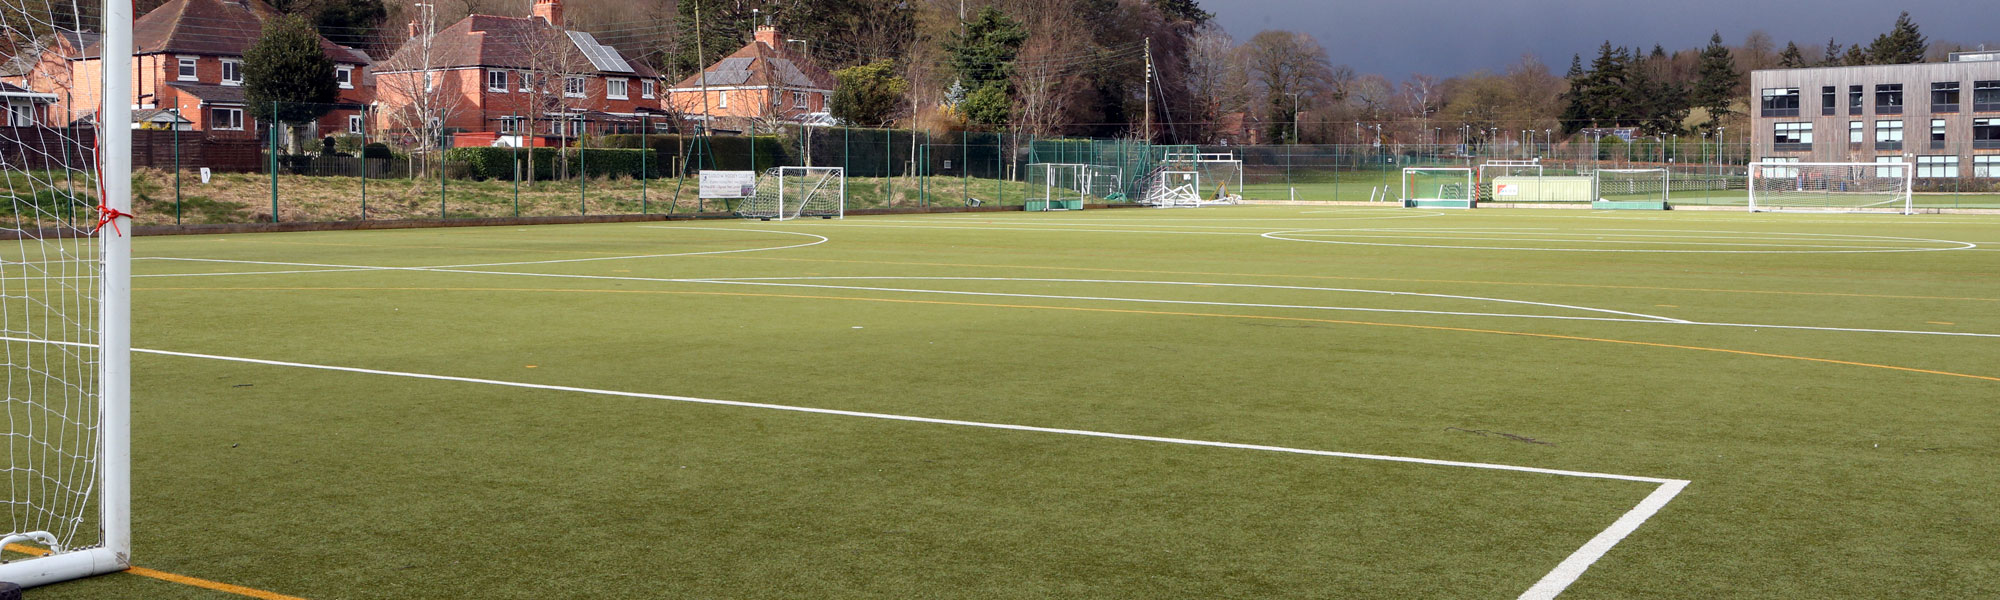 Football pitch at William Brookes School